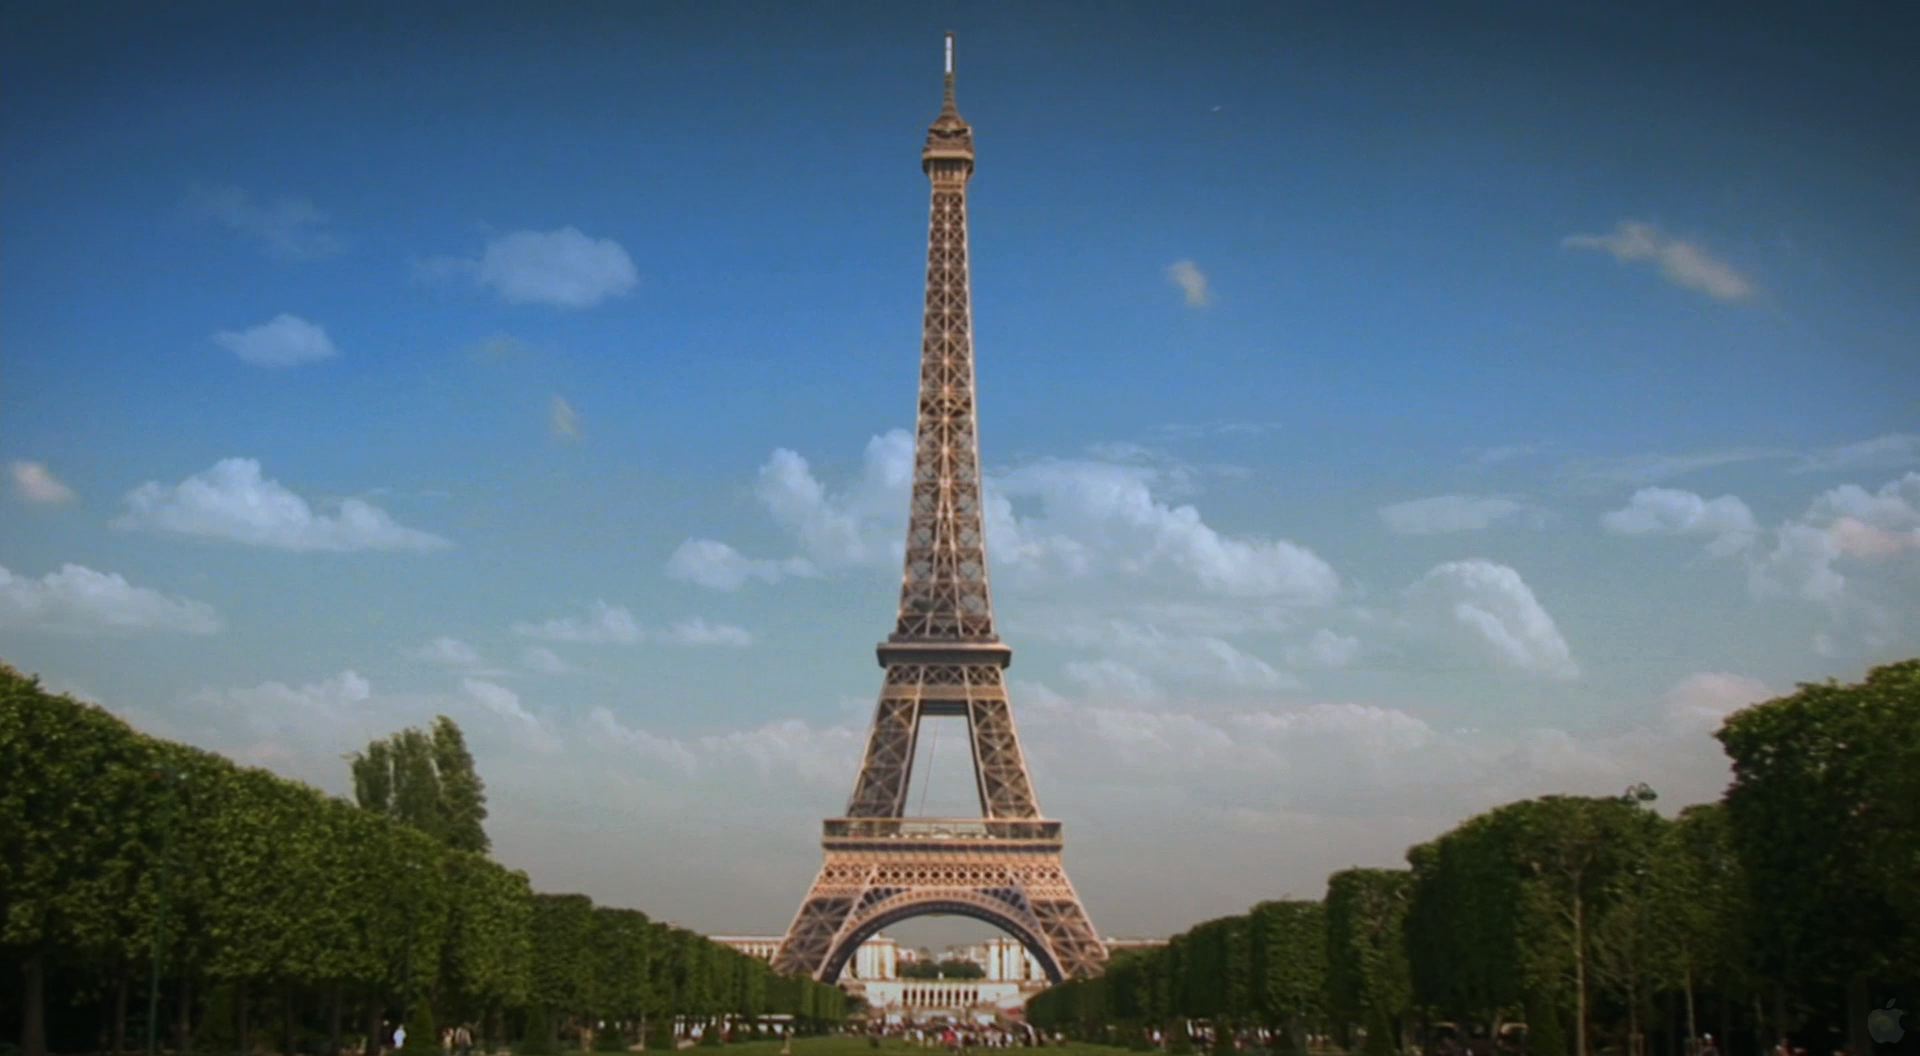 The Tower Has Bee Most Prominent Symbol Of Both Paris And